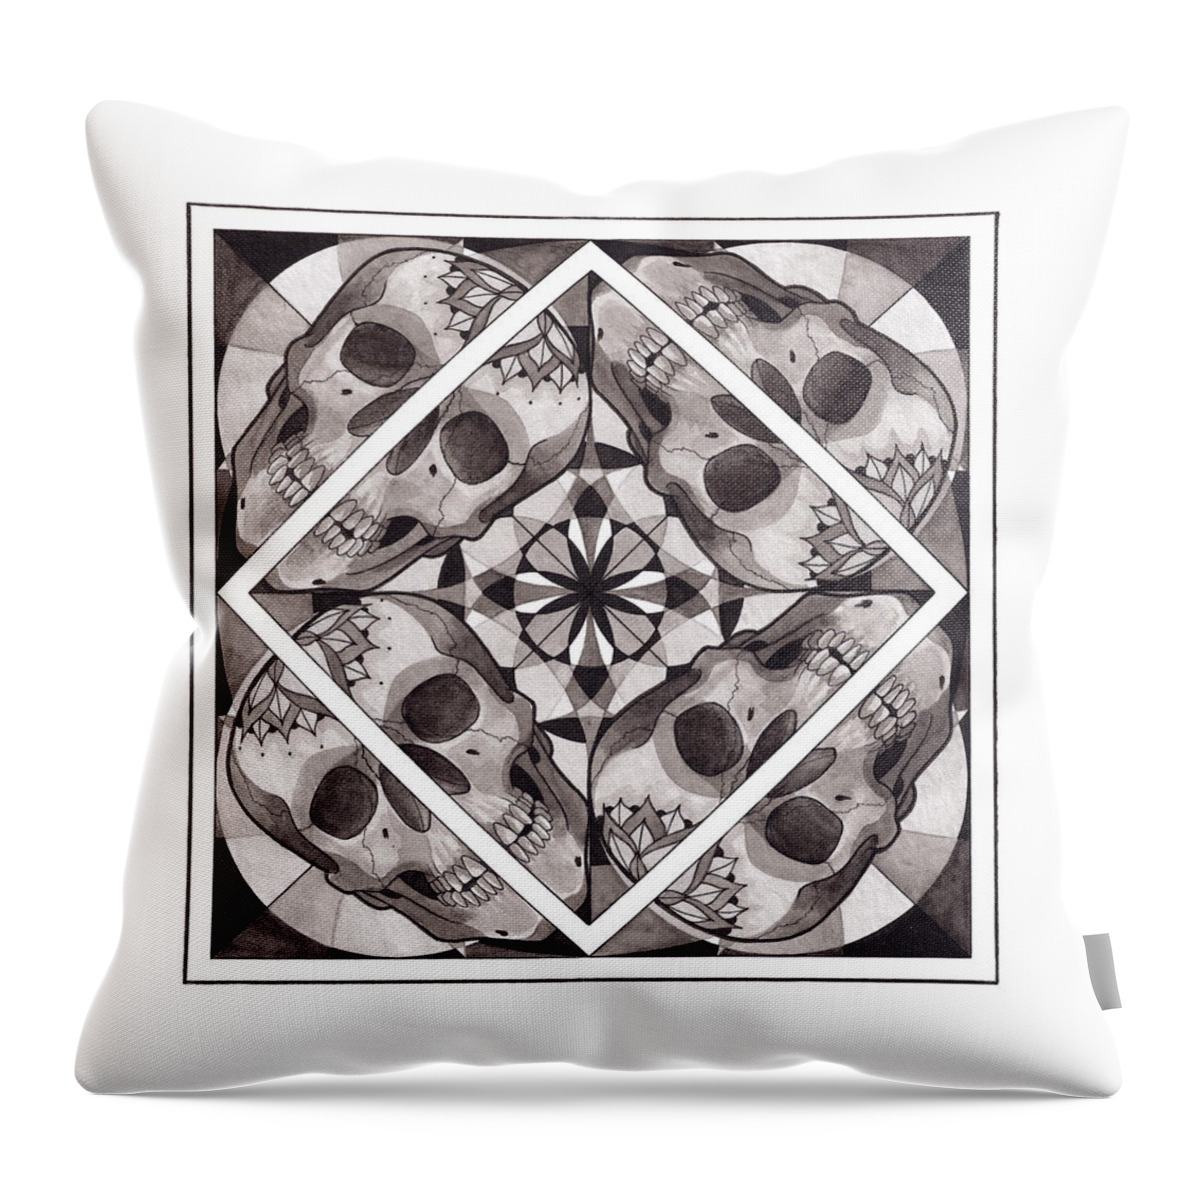 Mandala Throw Pillow featuring the mixed media Skull Mandala series number two by Deadcharming Art